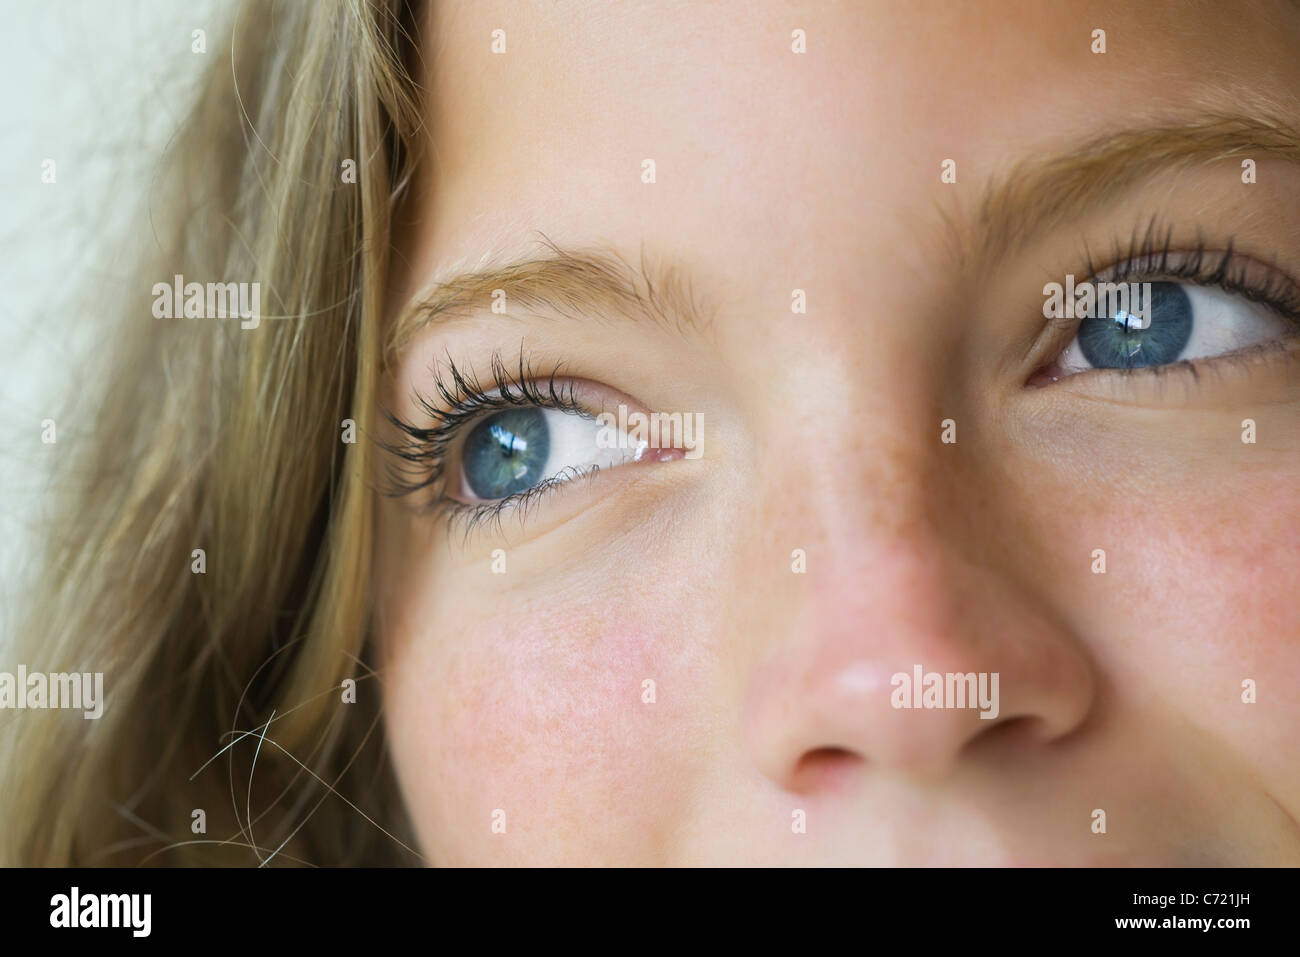 Close-up of young woman's eyes Stock Photo